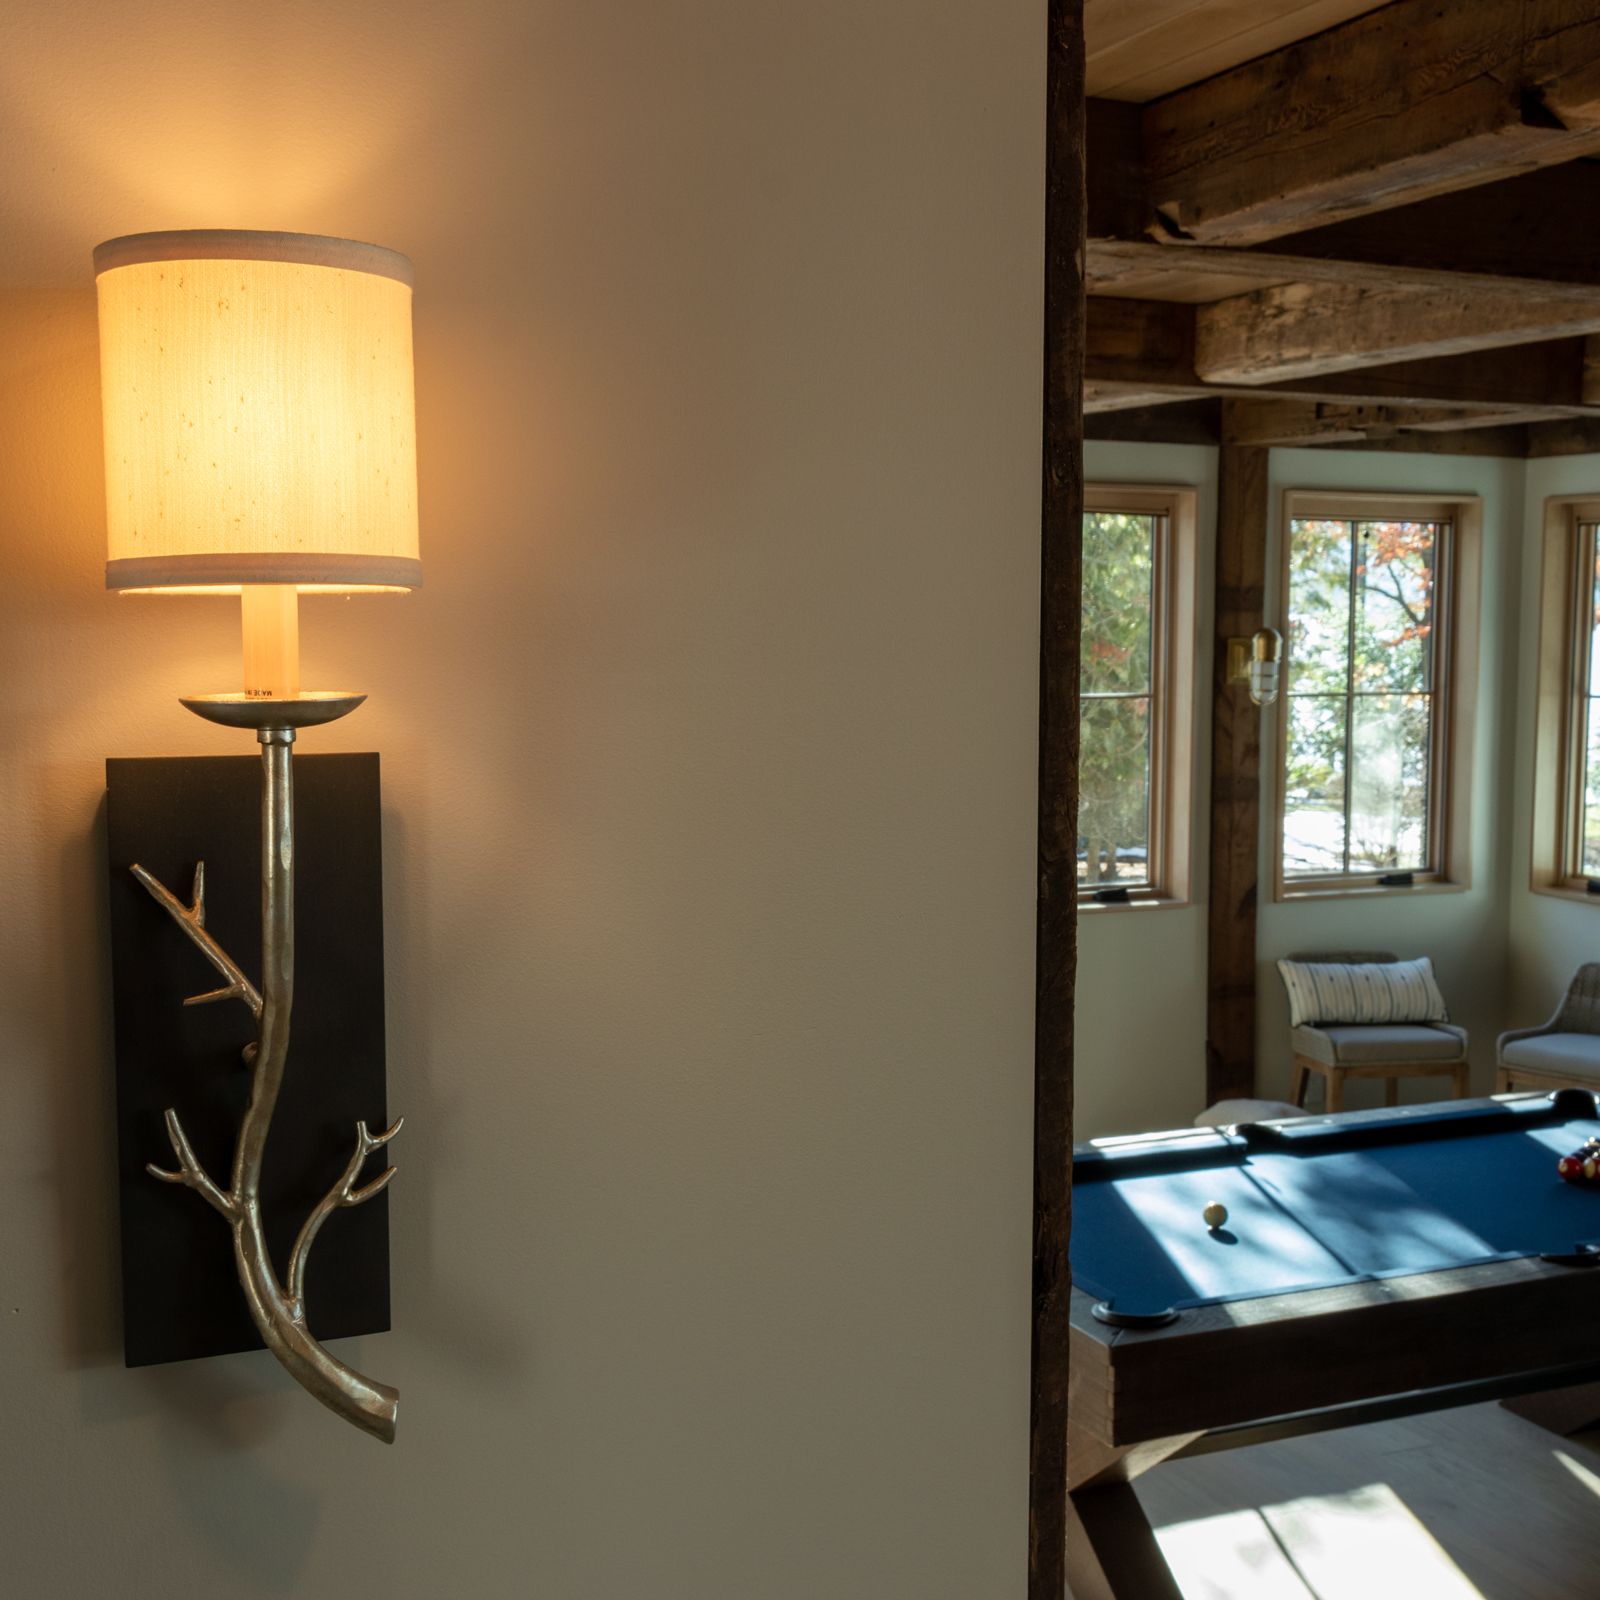 AJA speced a decorative sconce in a camp style twig design to accent the great camp style of the new lake house residence. 